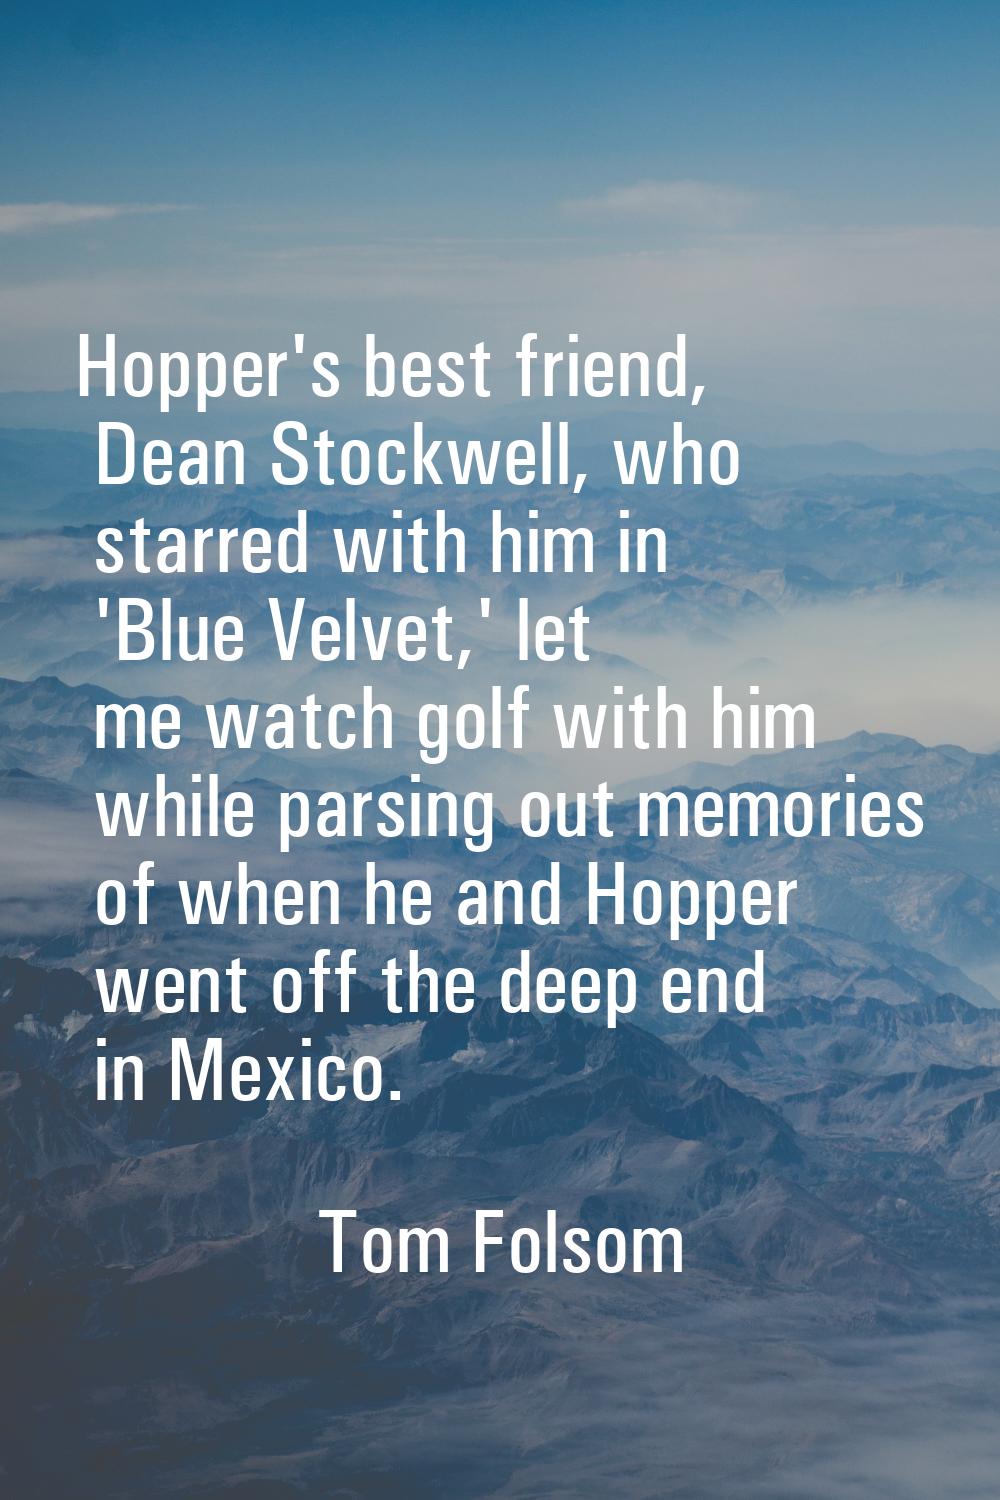 Hopper's best friend, Dean Stockwell, who starred with him in 'Blue Velvet,' let me watch golf with